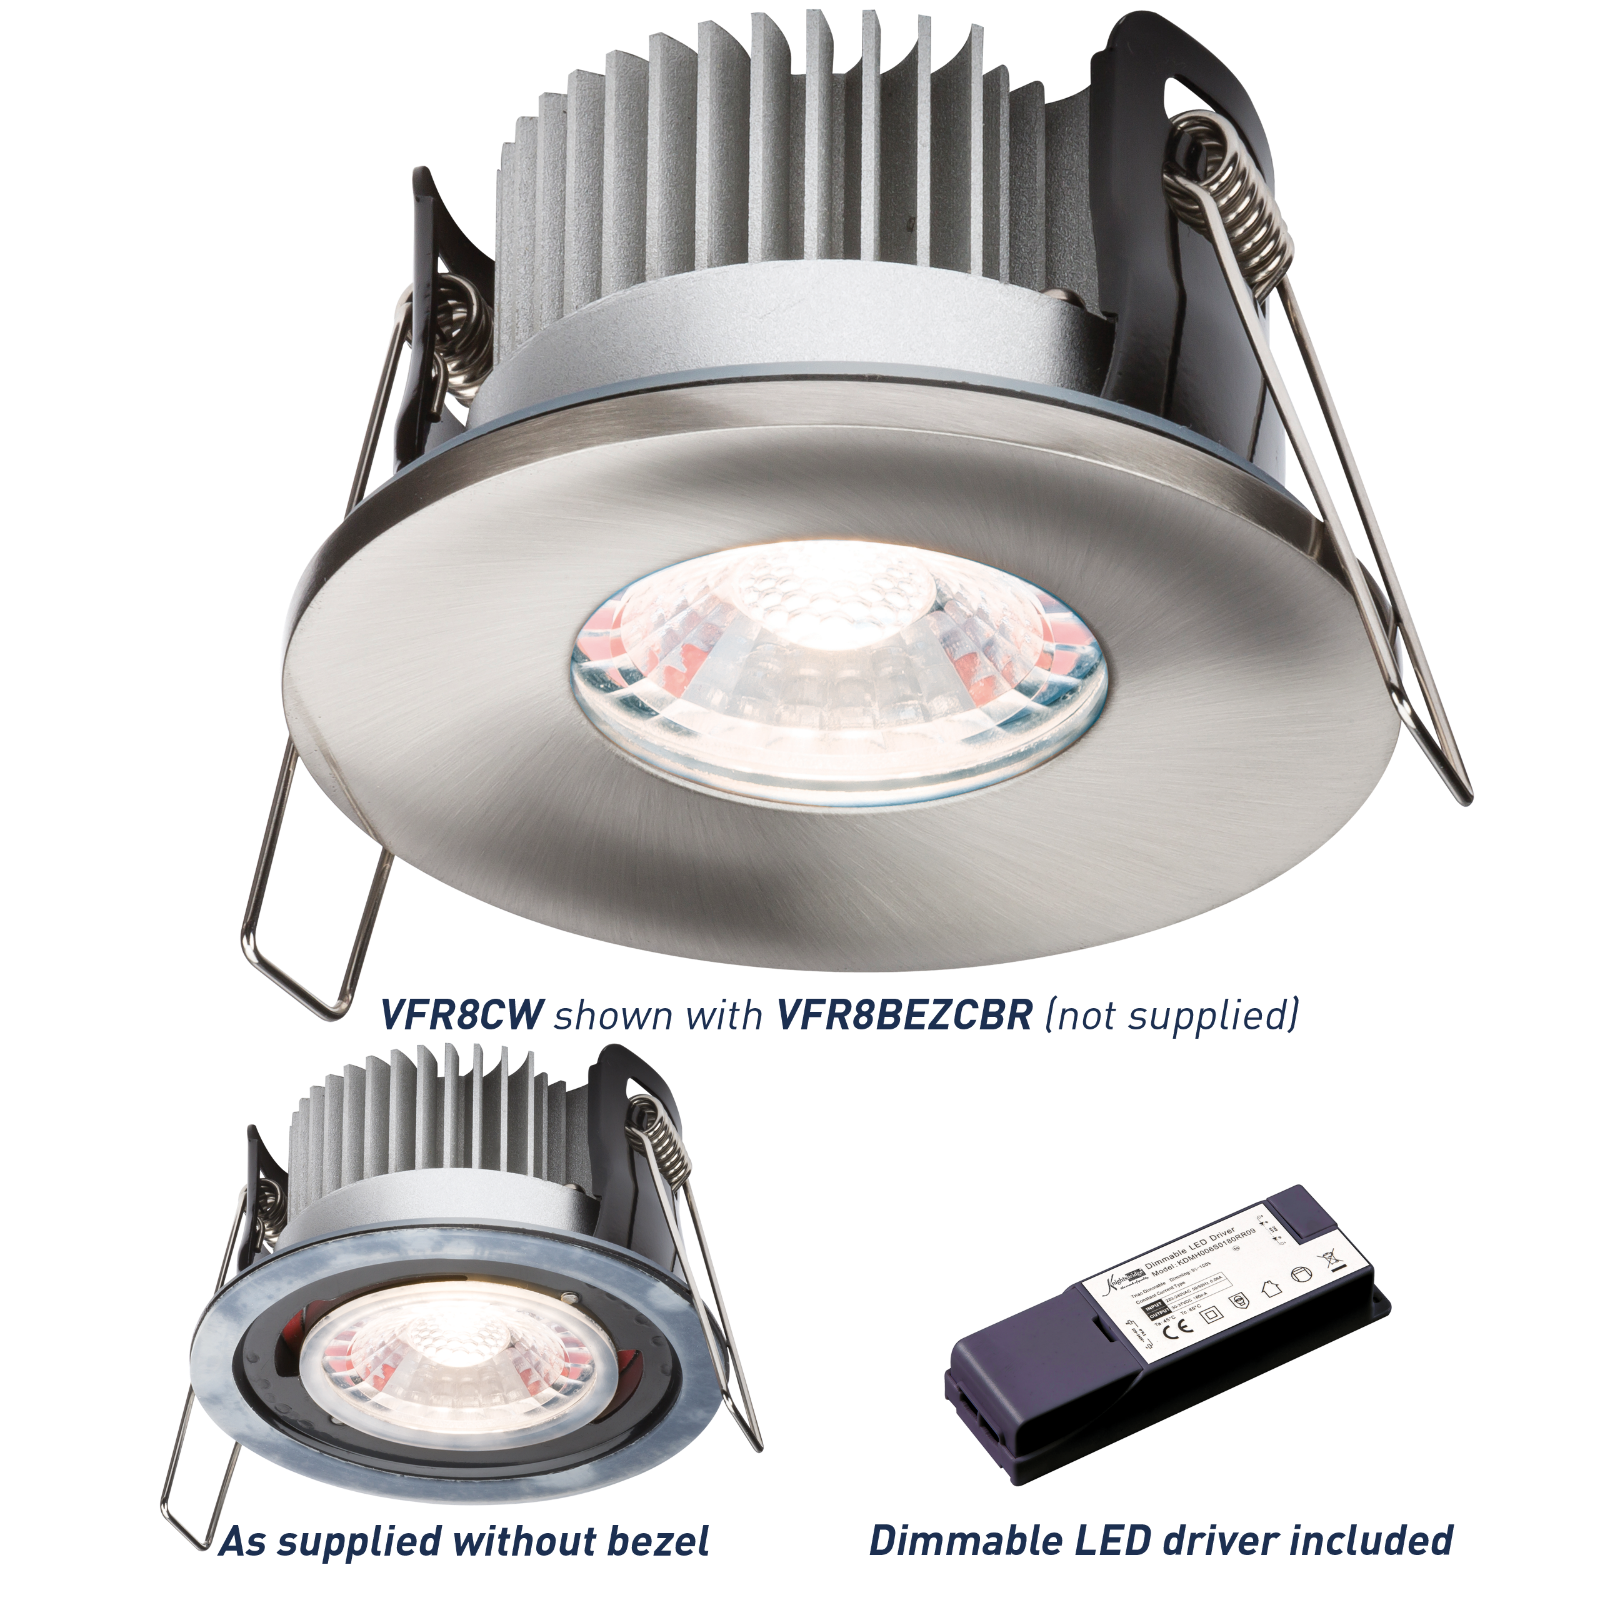 PROKNIGHT LED IP65 8W Fire-Rated Downlight 4000K - VFR8CW 